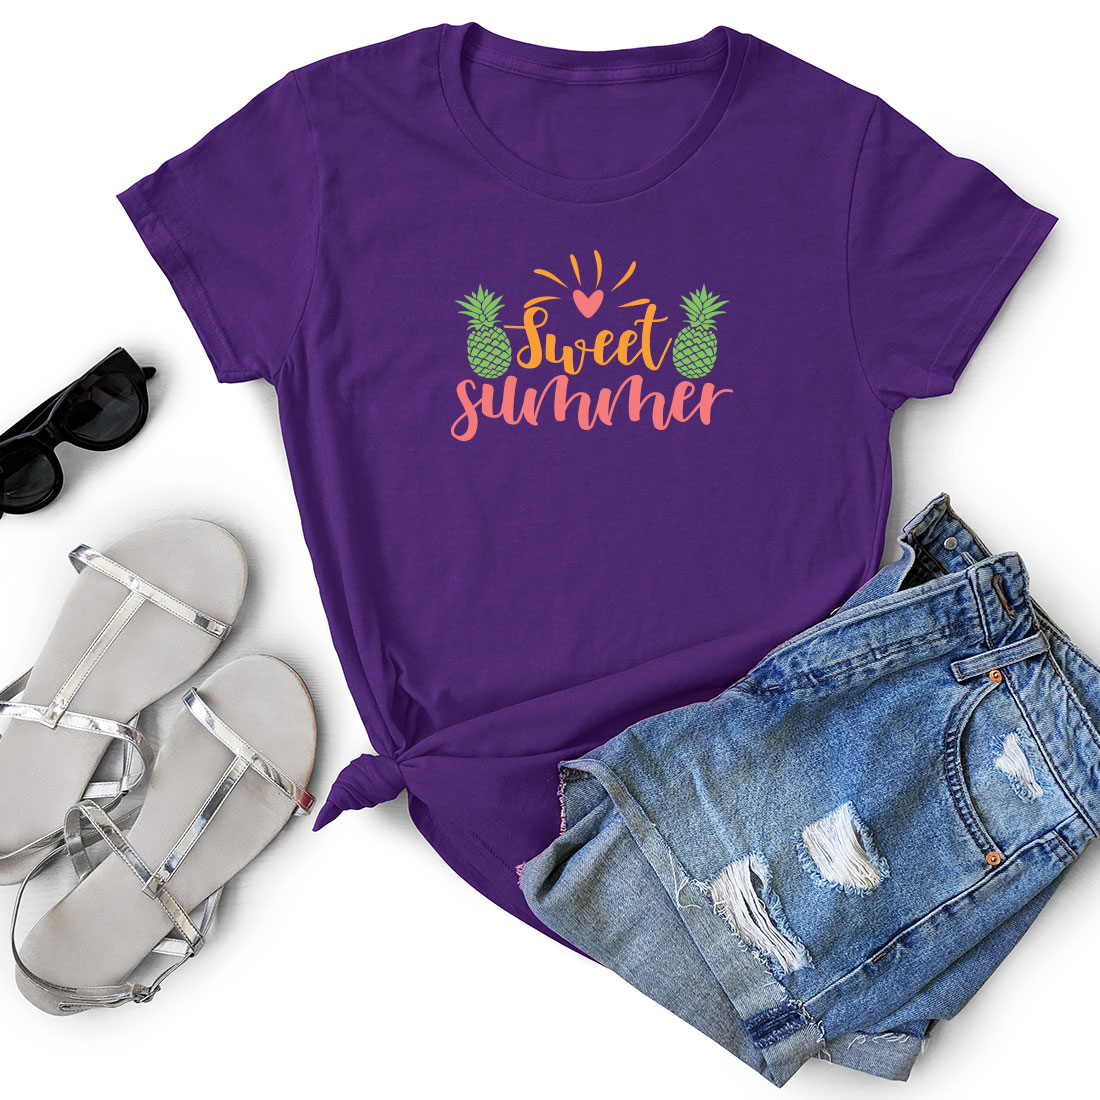 T - shirt that says sweet summer next to a pair of shorts.